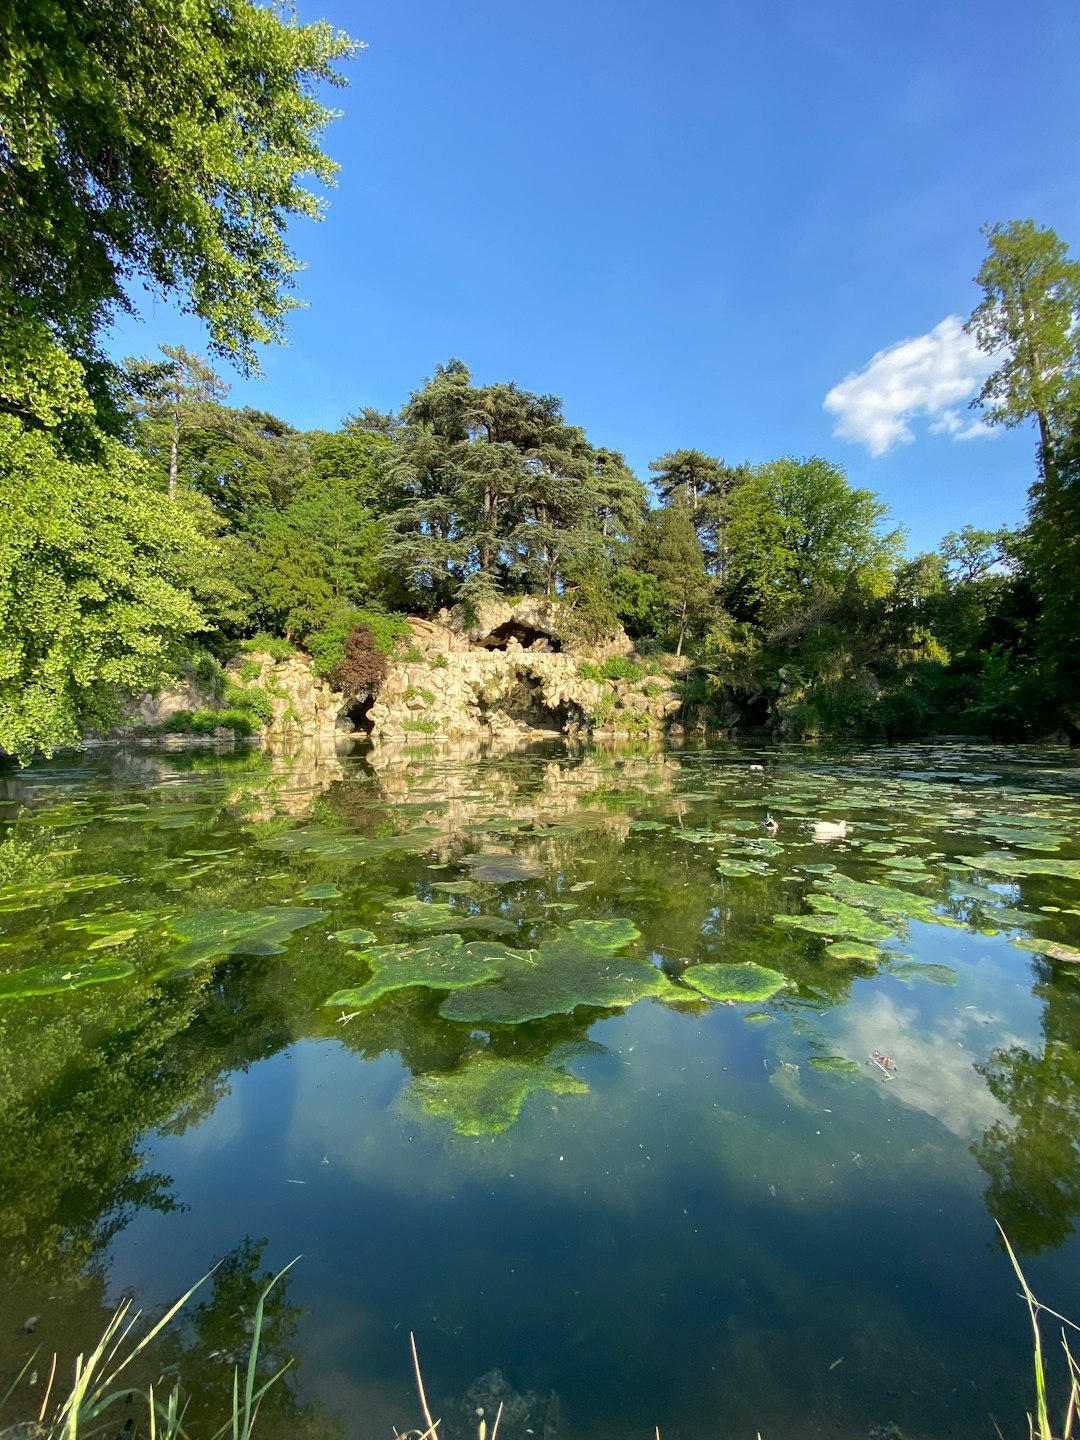 Travel Tips and Stories of Bois de Boulogne in France